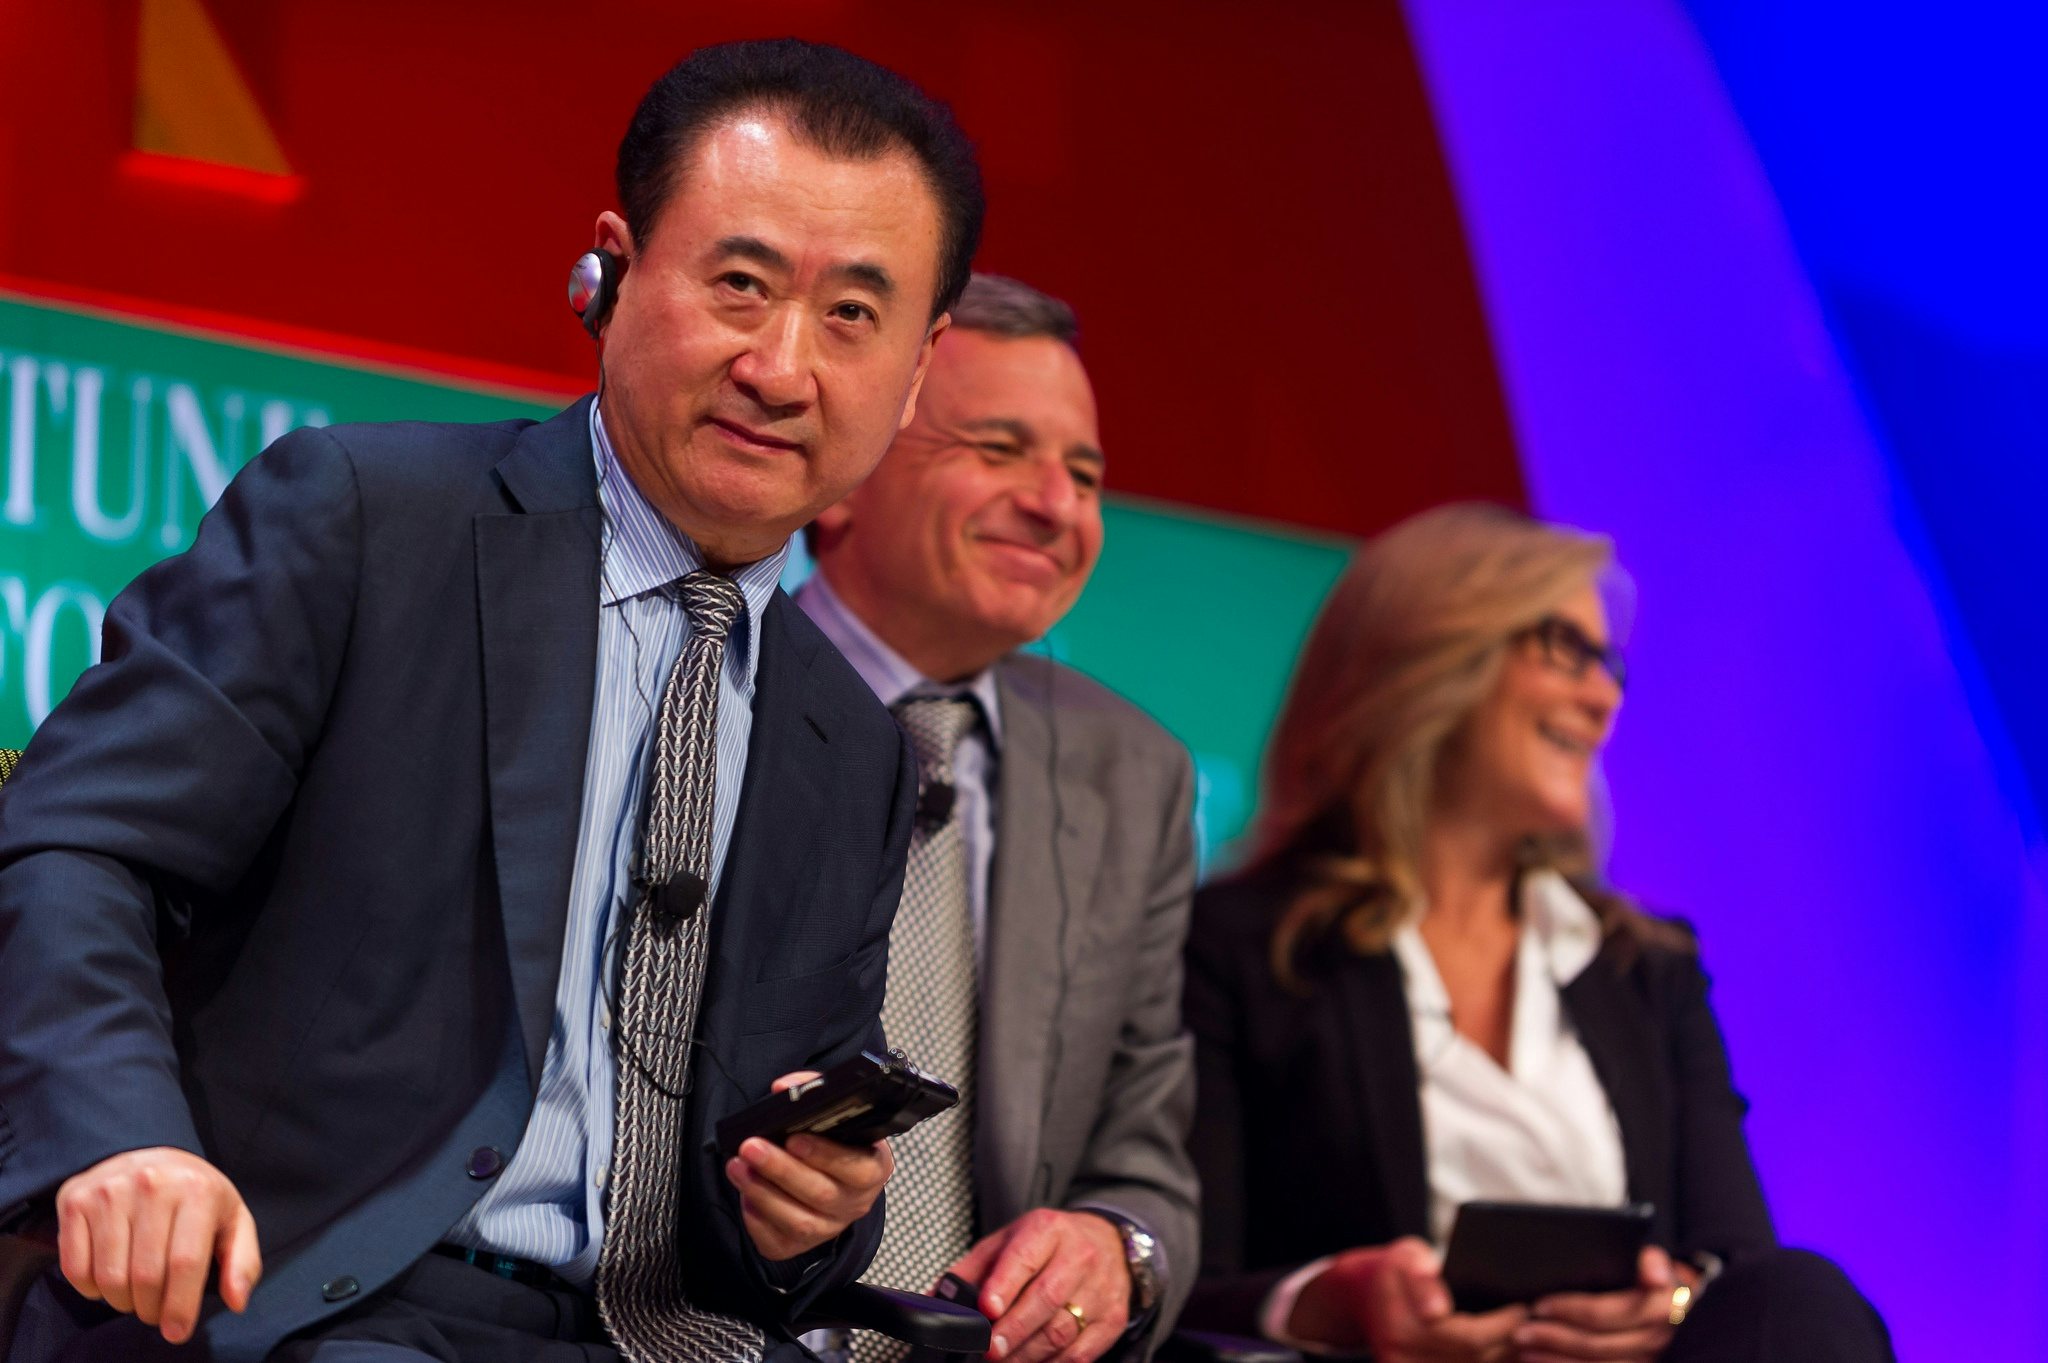 Wang Jianlin at the Fortune Global Forum in 2013. (Flickr/Fortune Live Media)